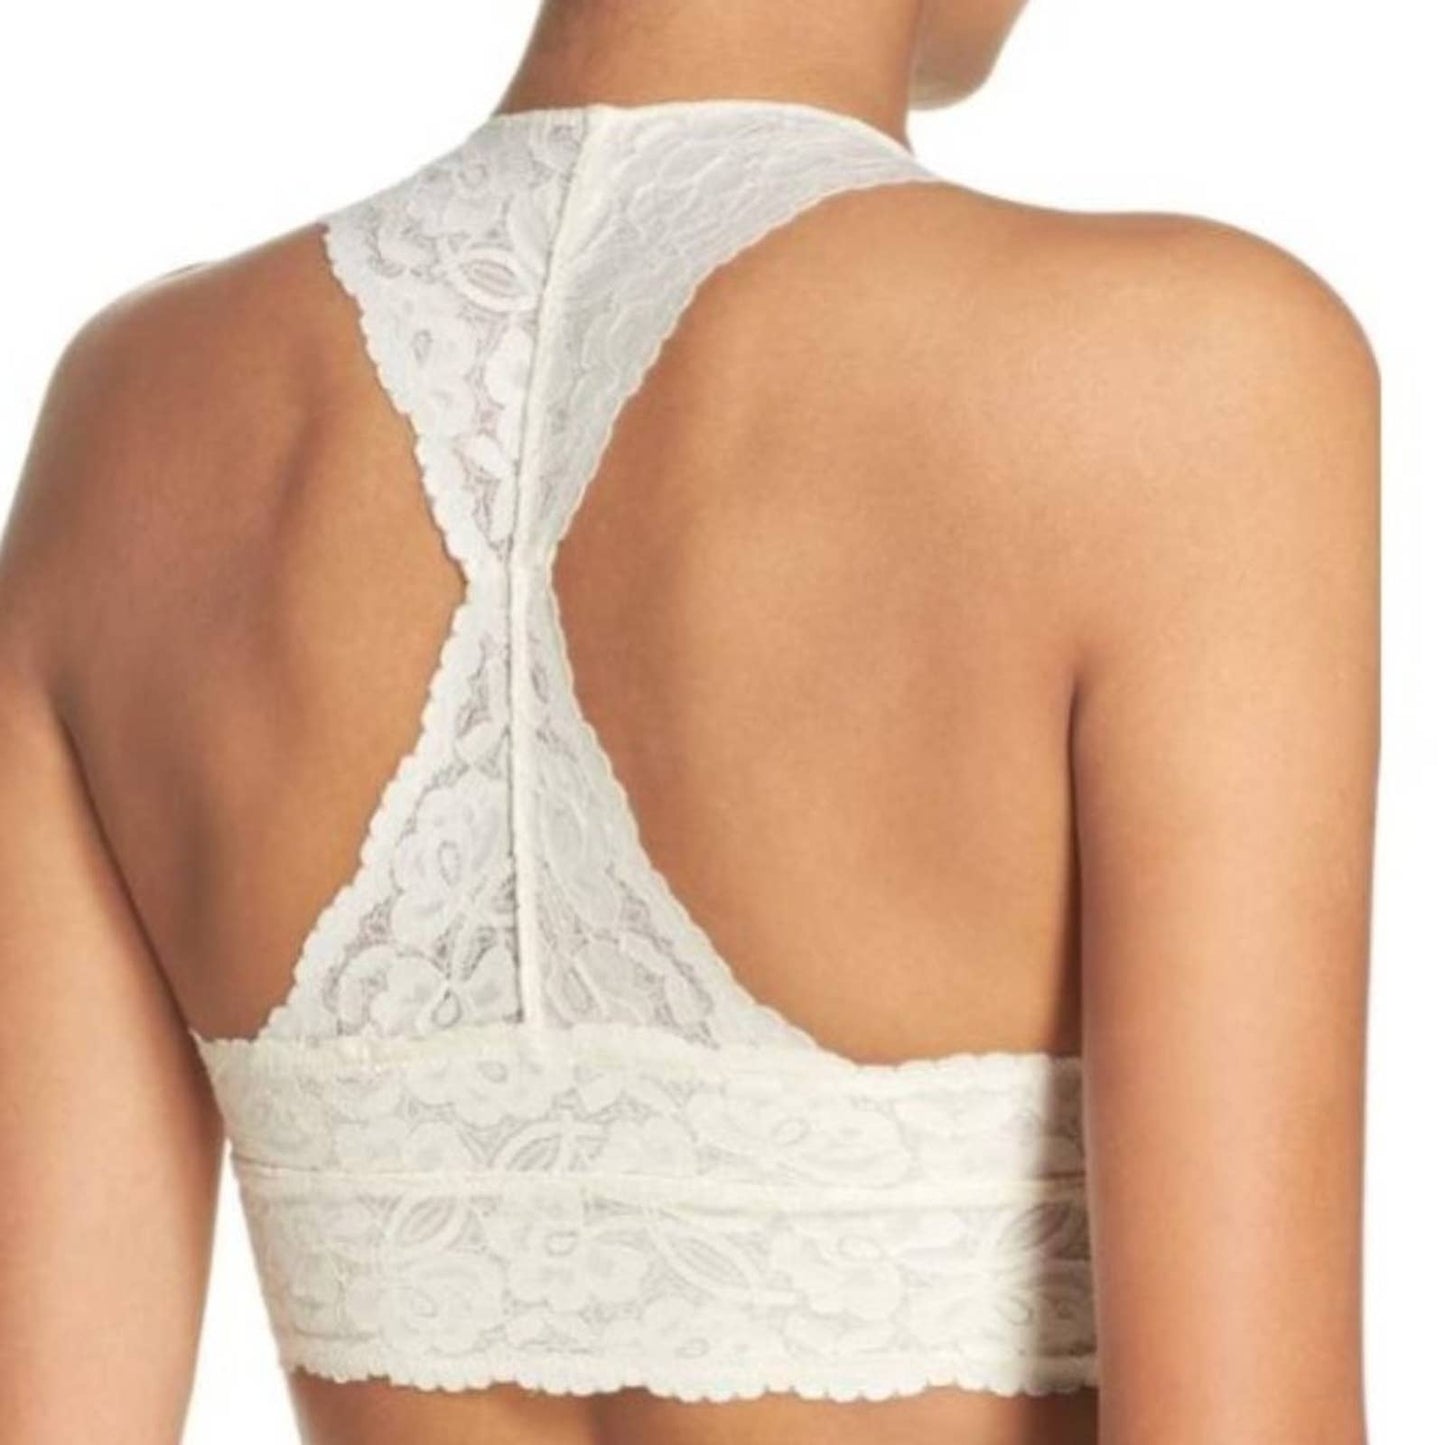 Free People Galloon Lace Racerback Bra in White NWT Brand New